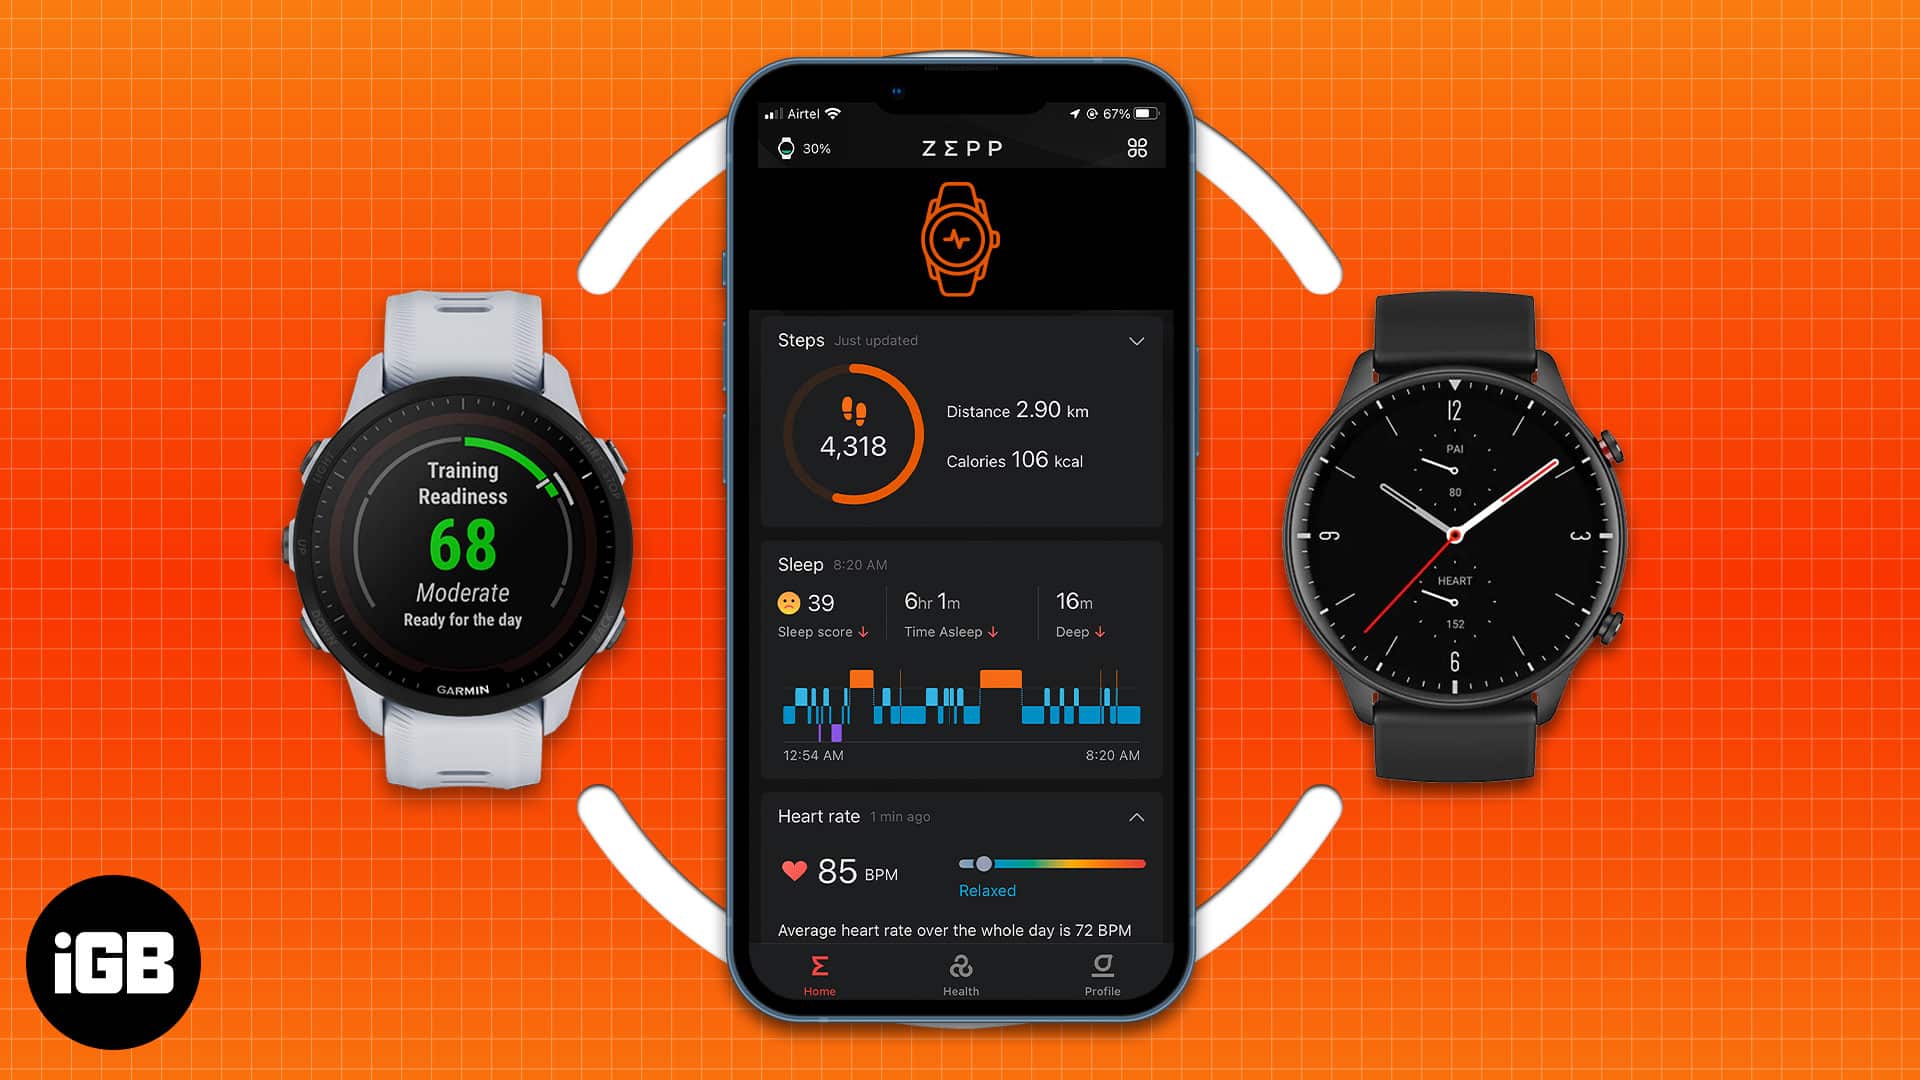 Atlas intelligens dekorere How to connect Android Wear watch to iPhone - iGeeksBlog